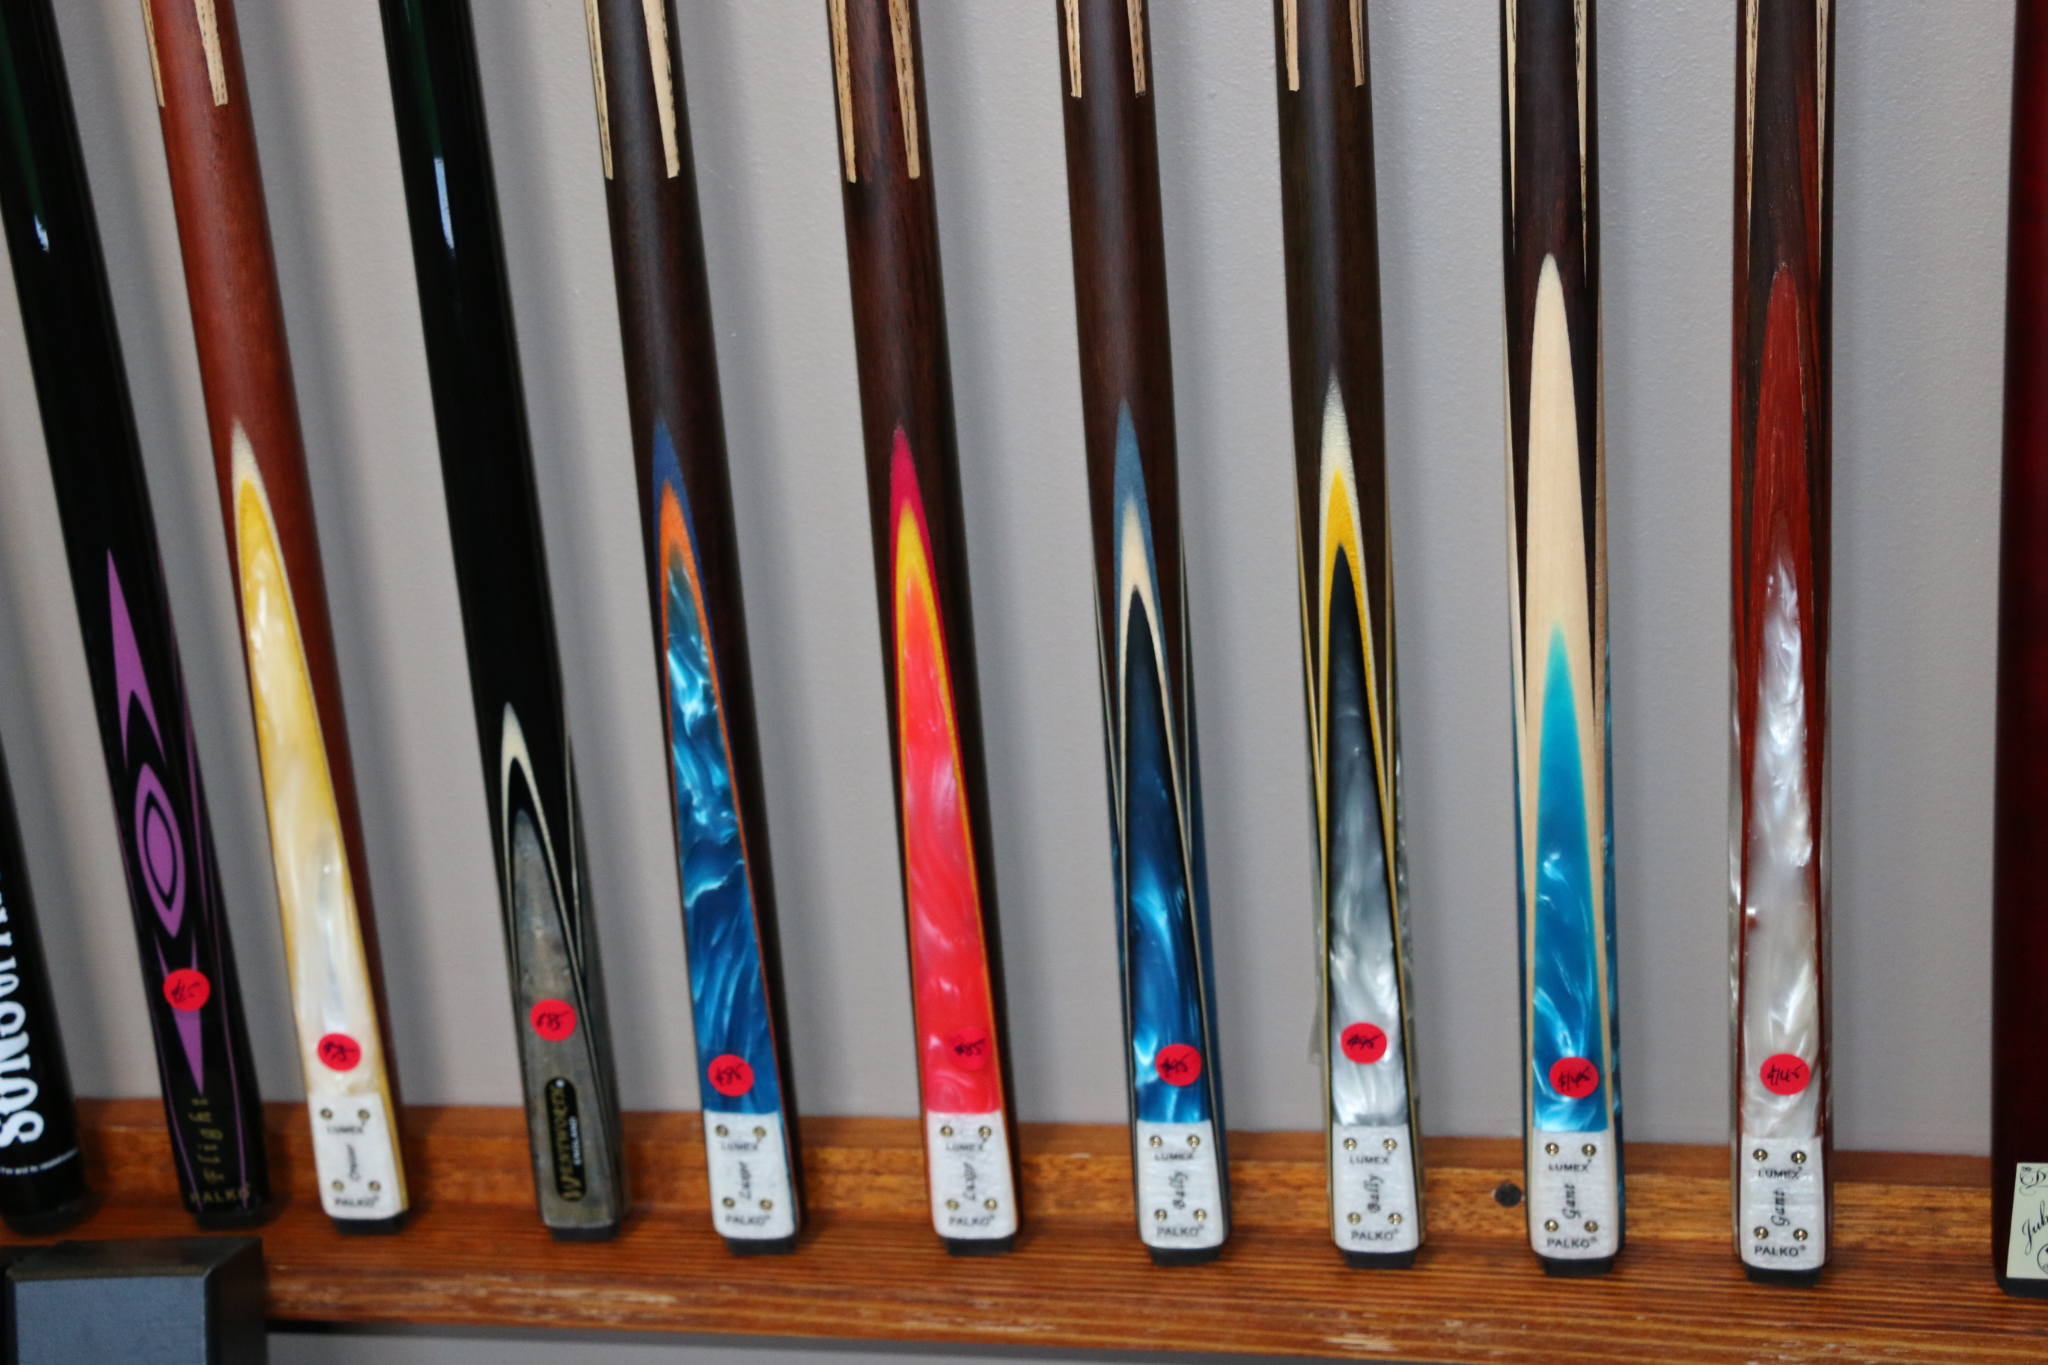 Three Tips For Finding the Best Pool Cues